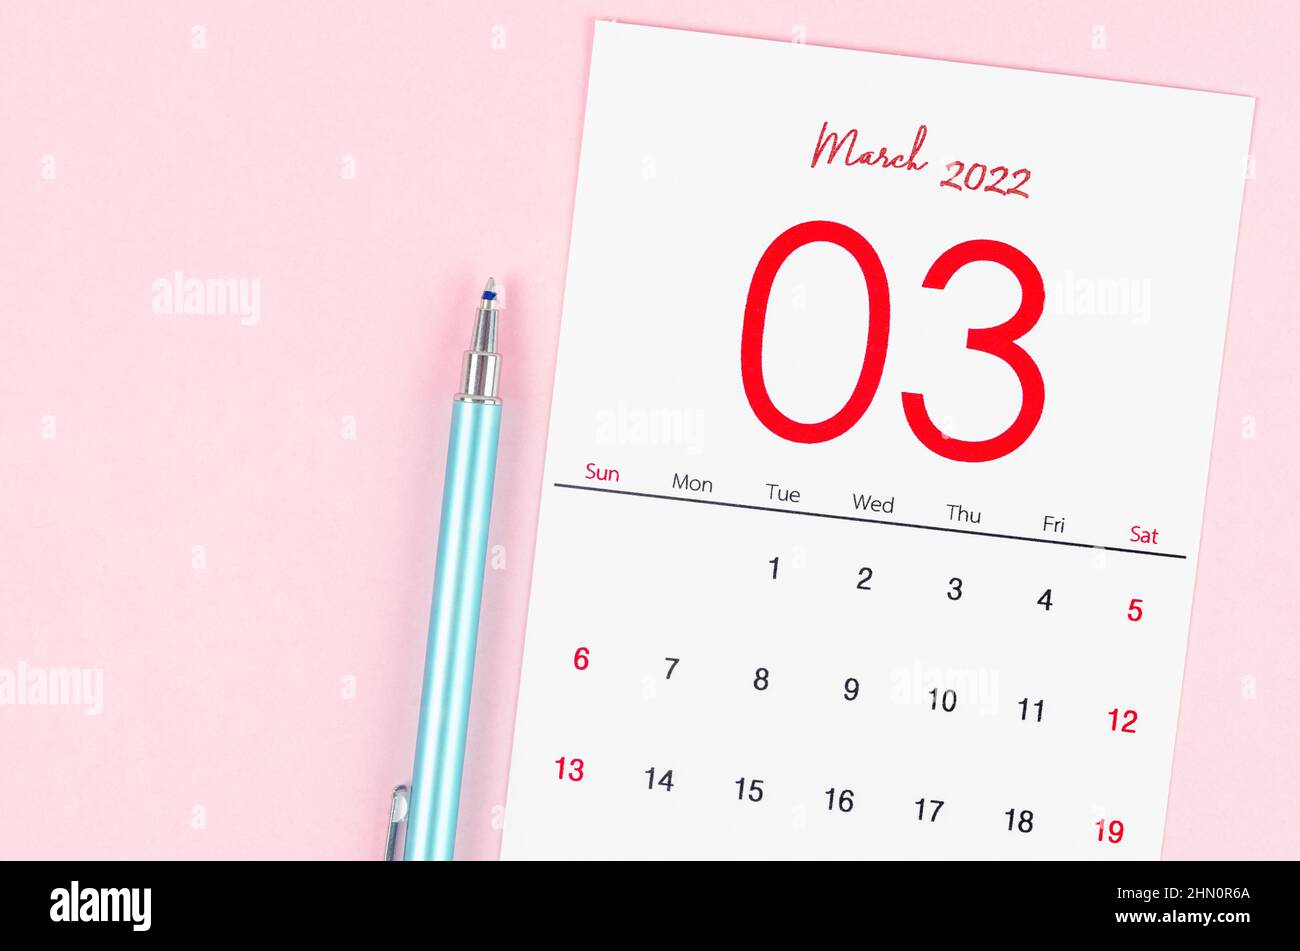 The March 2022 calendar with pen on pink background. Stock Photo